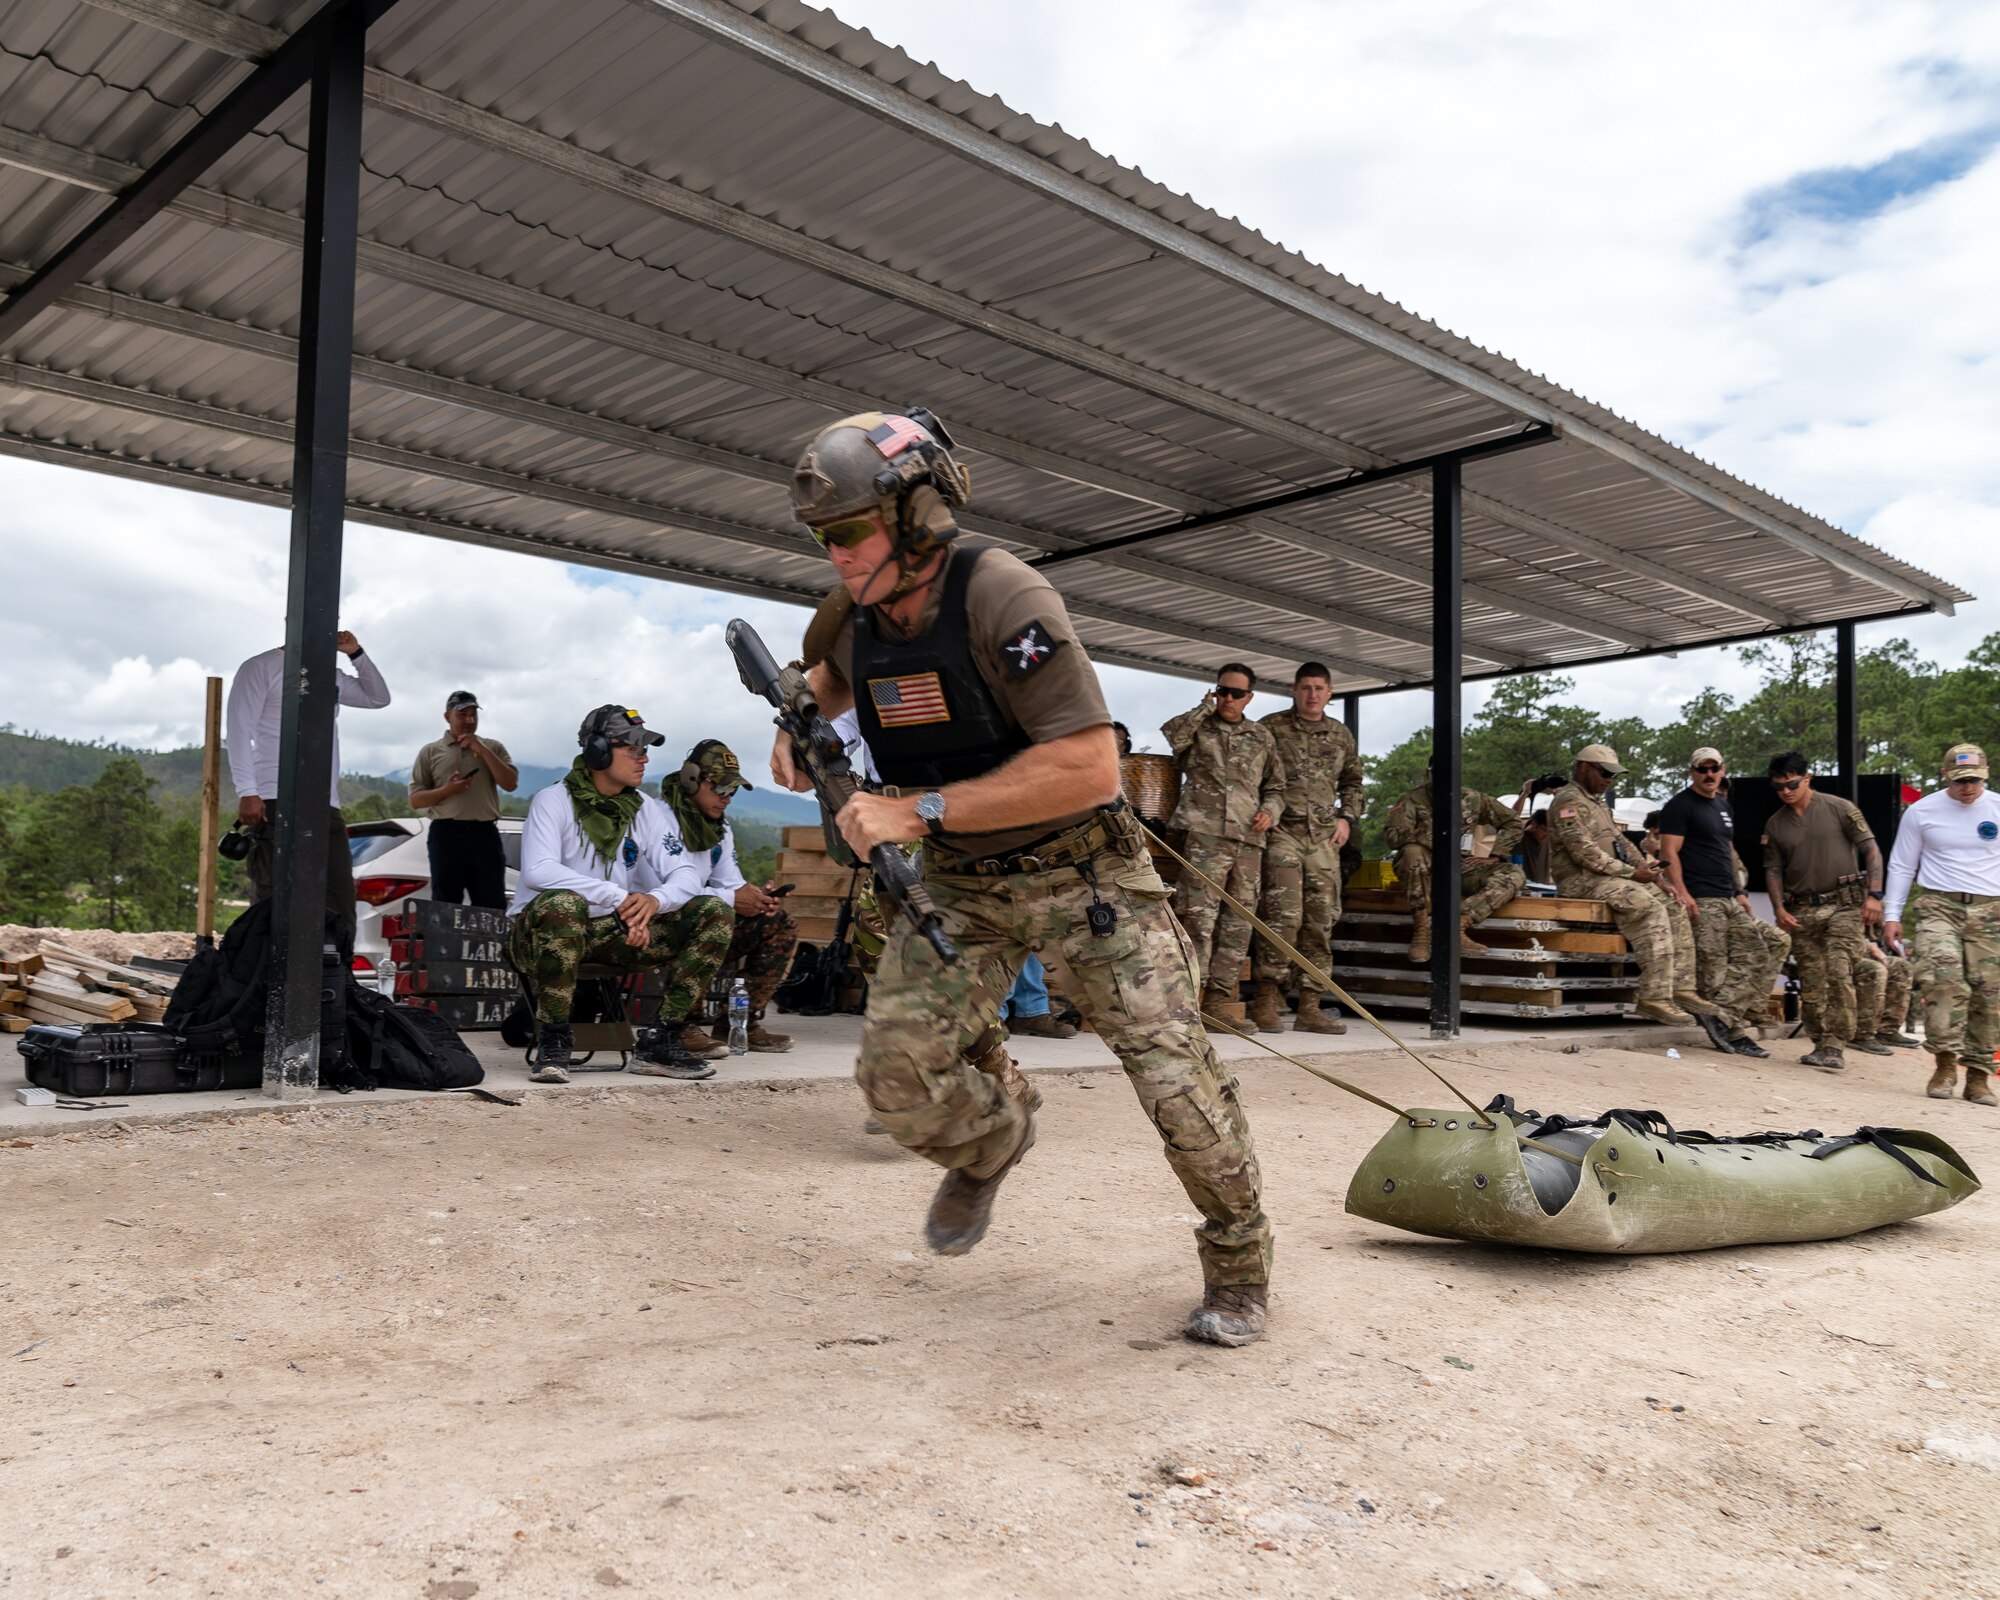 A United States team member pulls a sled as part of Fuerzas Comando 2022 Day 2 during an individual assault course in La Venta, Honduras, June 14, 2022. Fuerzas Comando is a Special Operation skills competition and a senior leader seminar supported by SOCSOUTH. The competition enhances SOF regional cooperation and exchanges best practices to combat transnational crime and counter illicit activities. (U.S. Air Force photo by Tech. Sgt. Lionel Castellano)